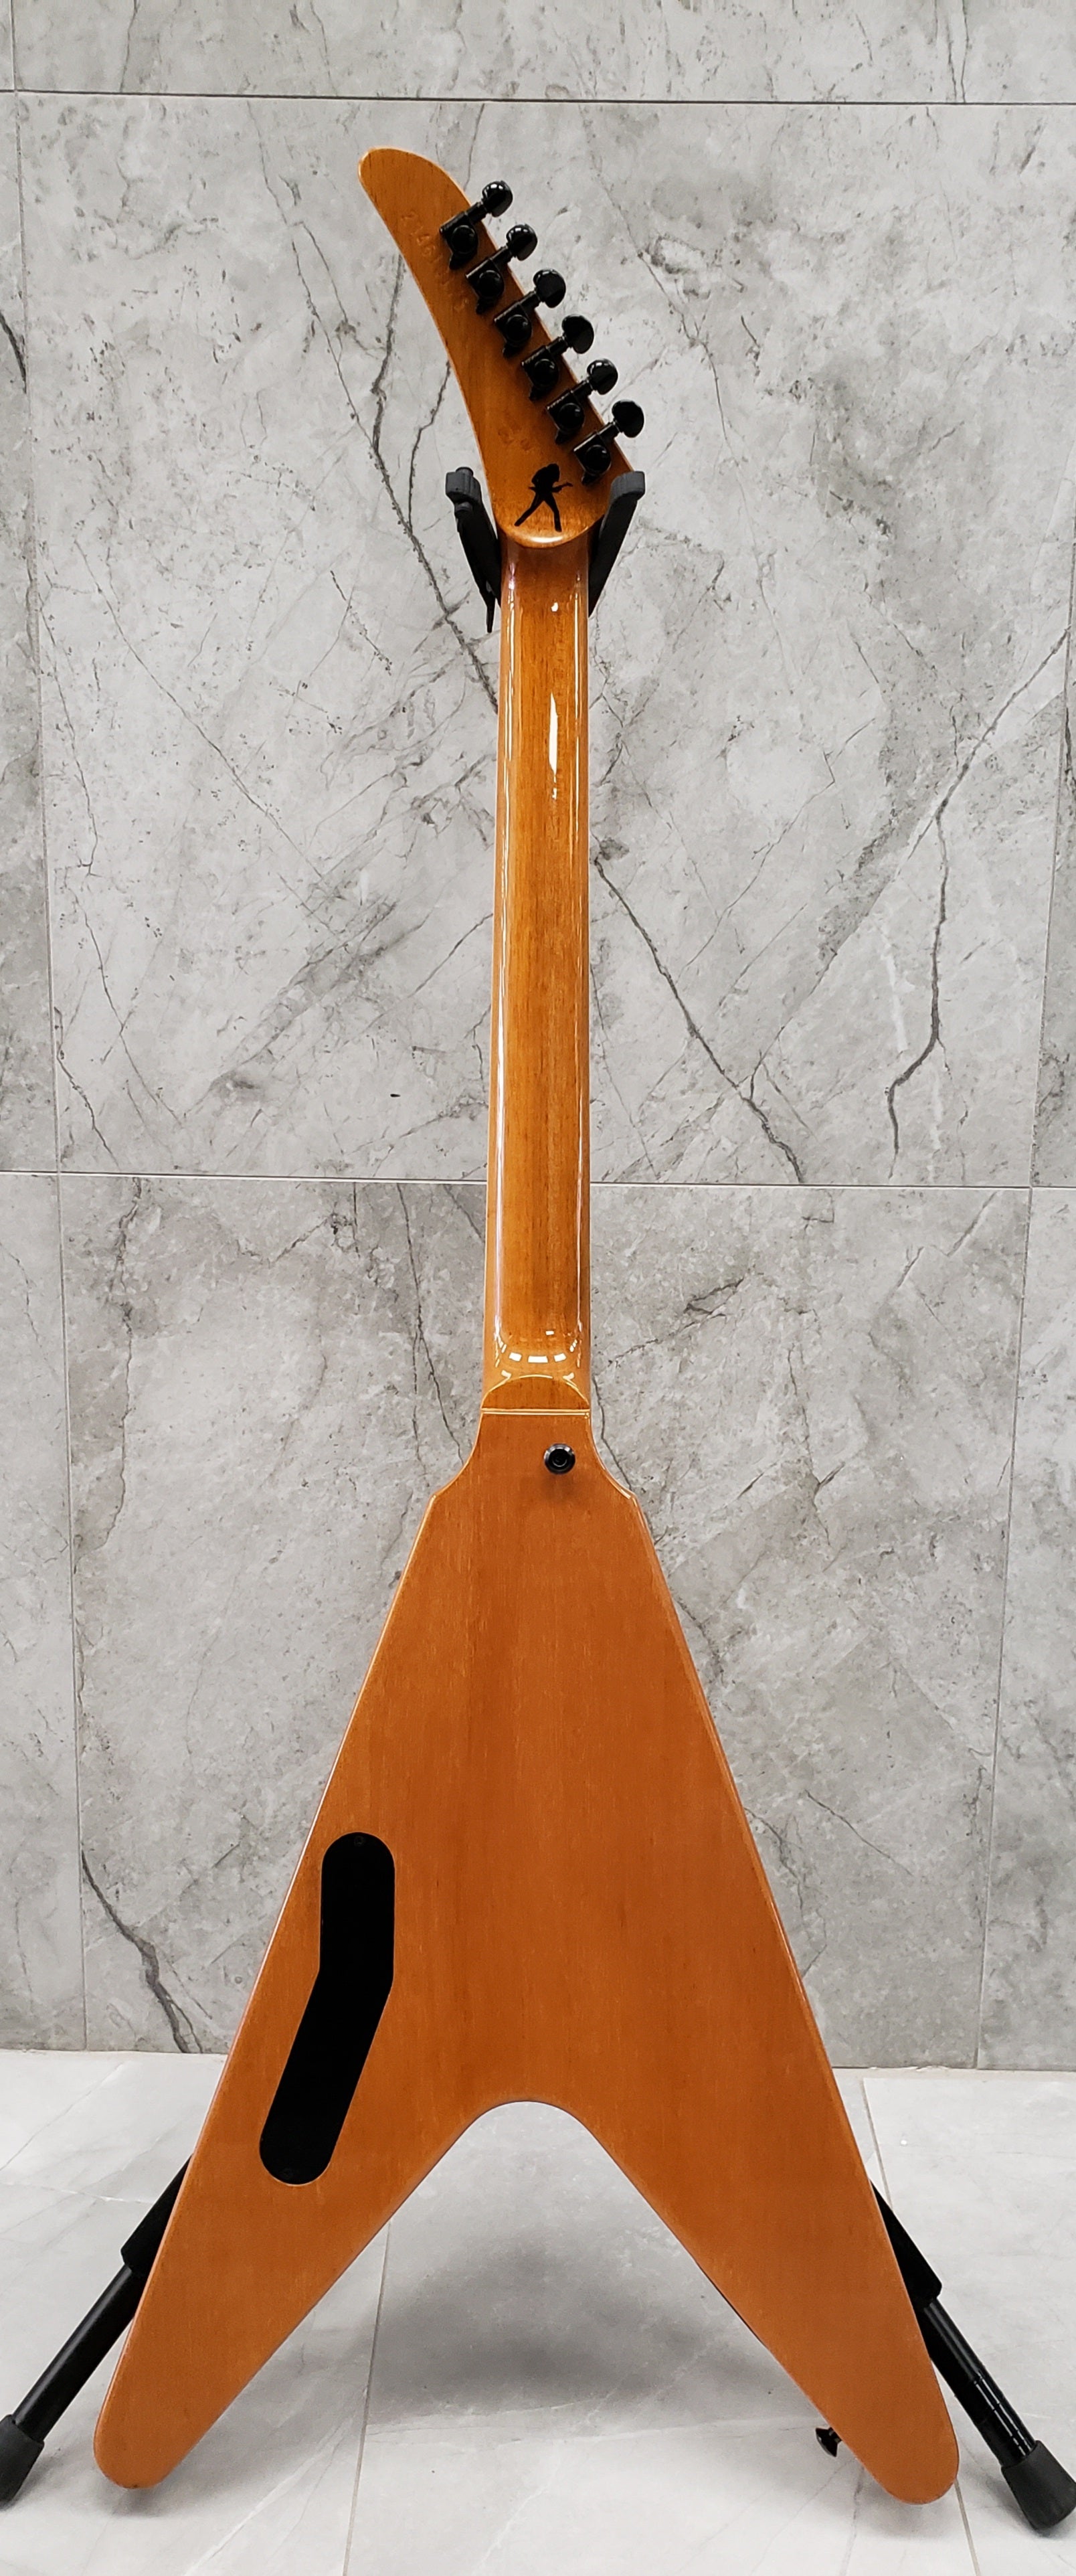 Gibson Dave Mustaine Flying V EXP - Antique Natural DSVX00ANBH